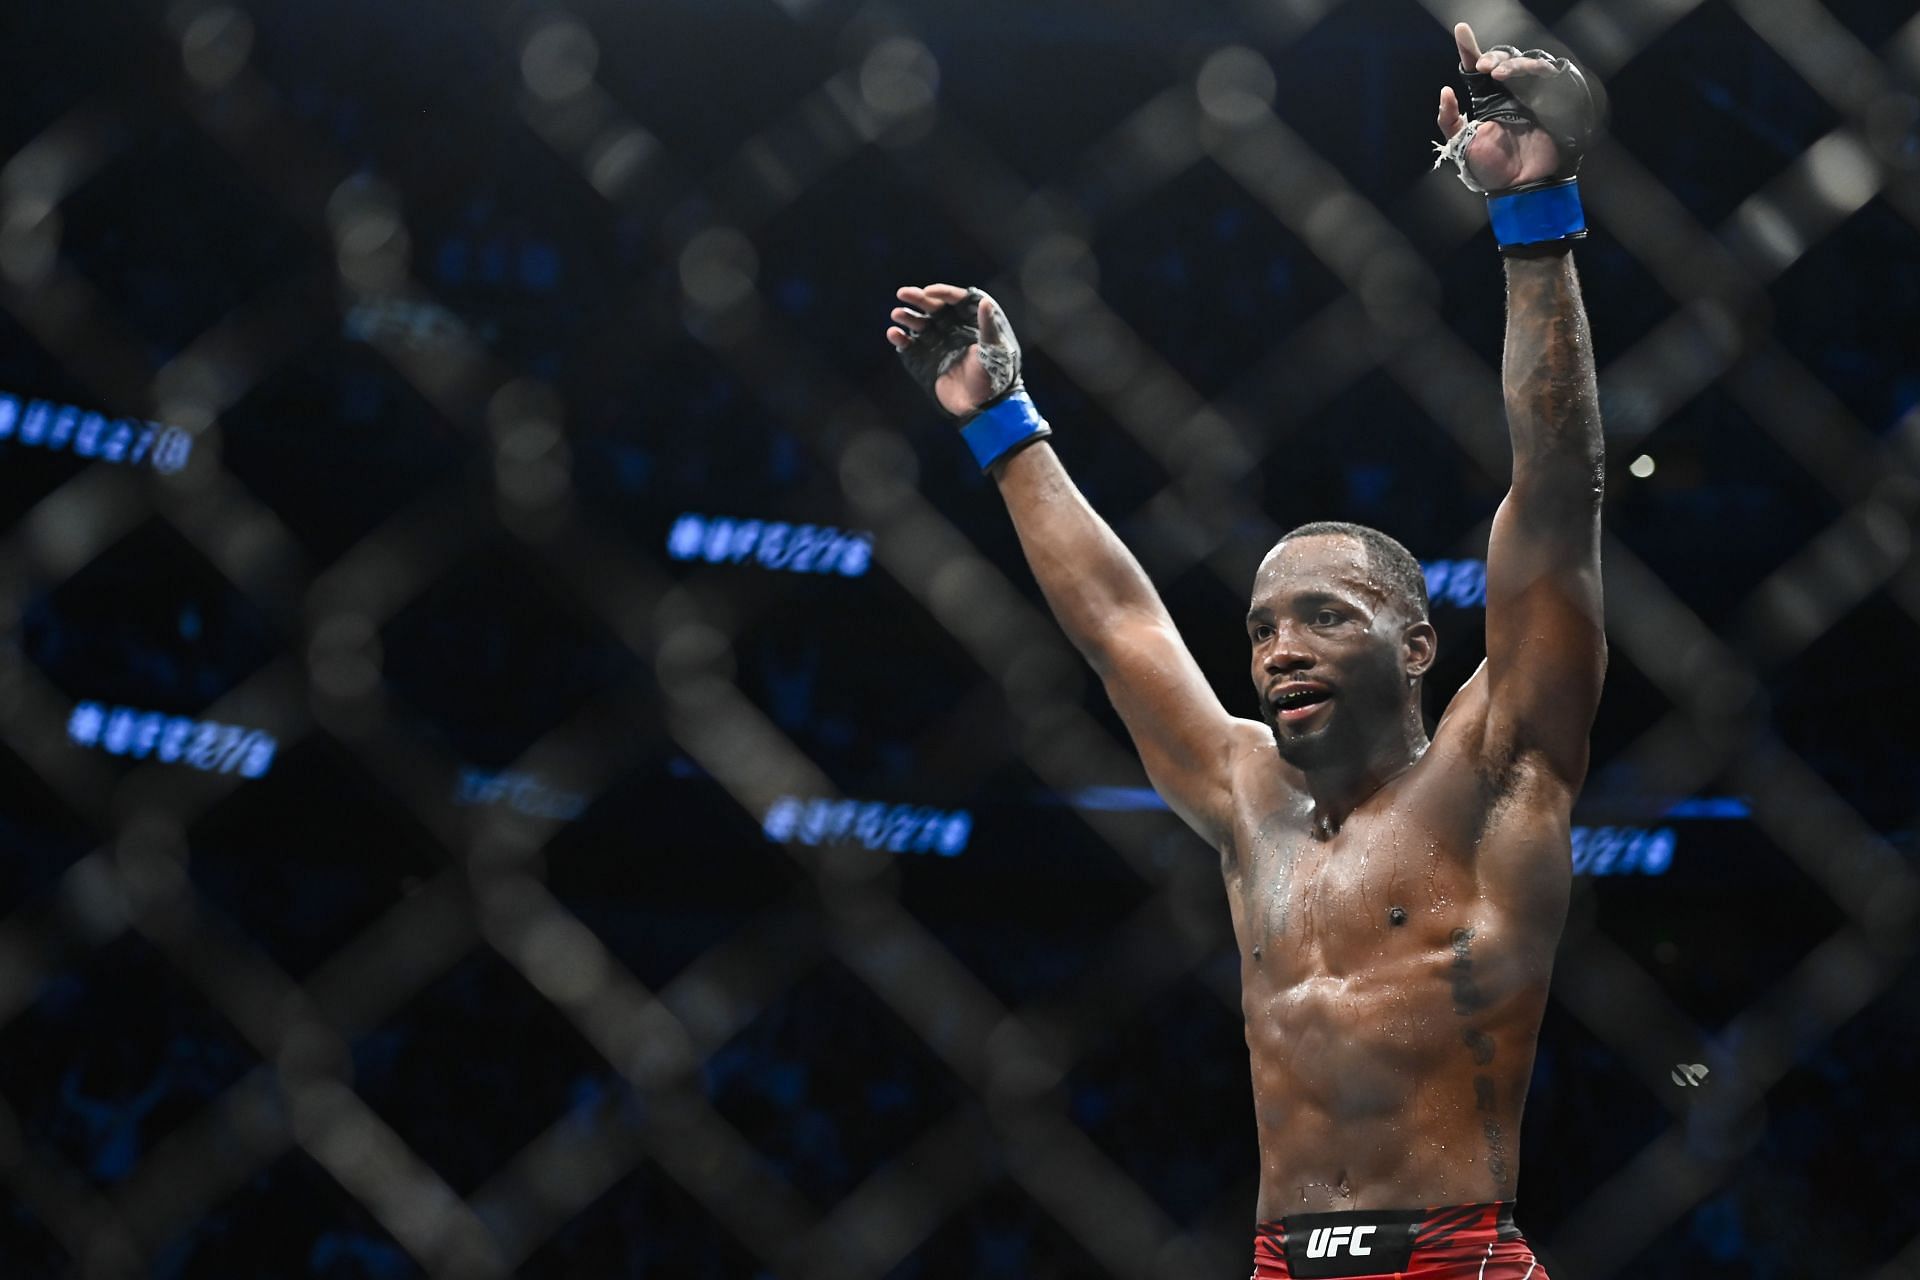 Leon Edwards&#039; octagon debut did not suggest he could be a future champion